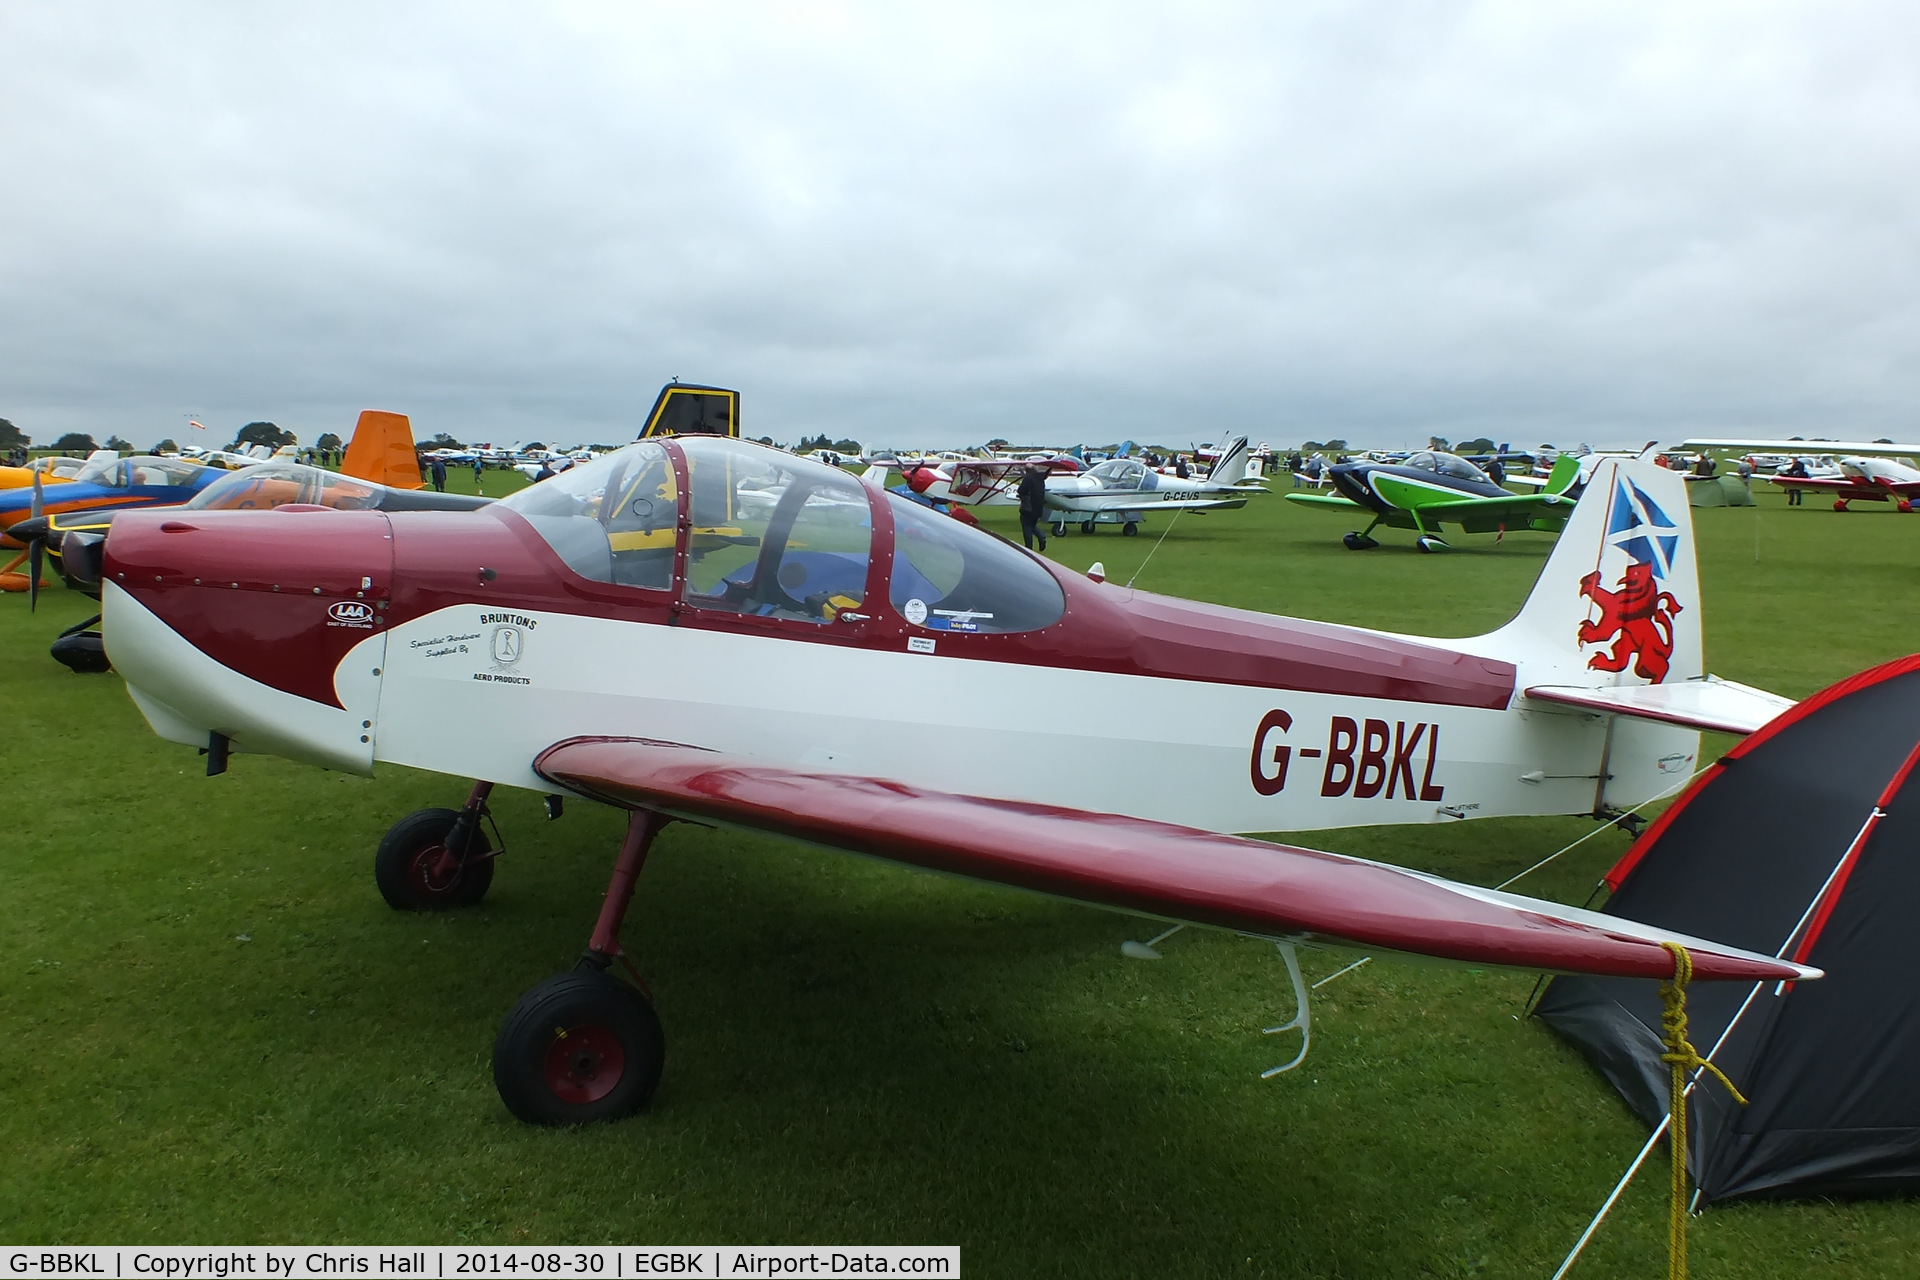 G-BBKL, 1958 Piel CP-301A Emeraude C/N 237, at the LAA Rally 2014, Sywell